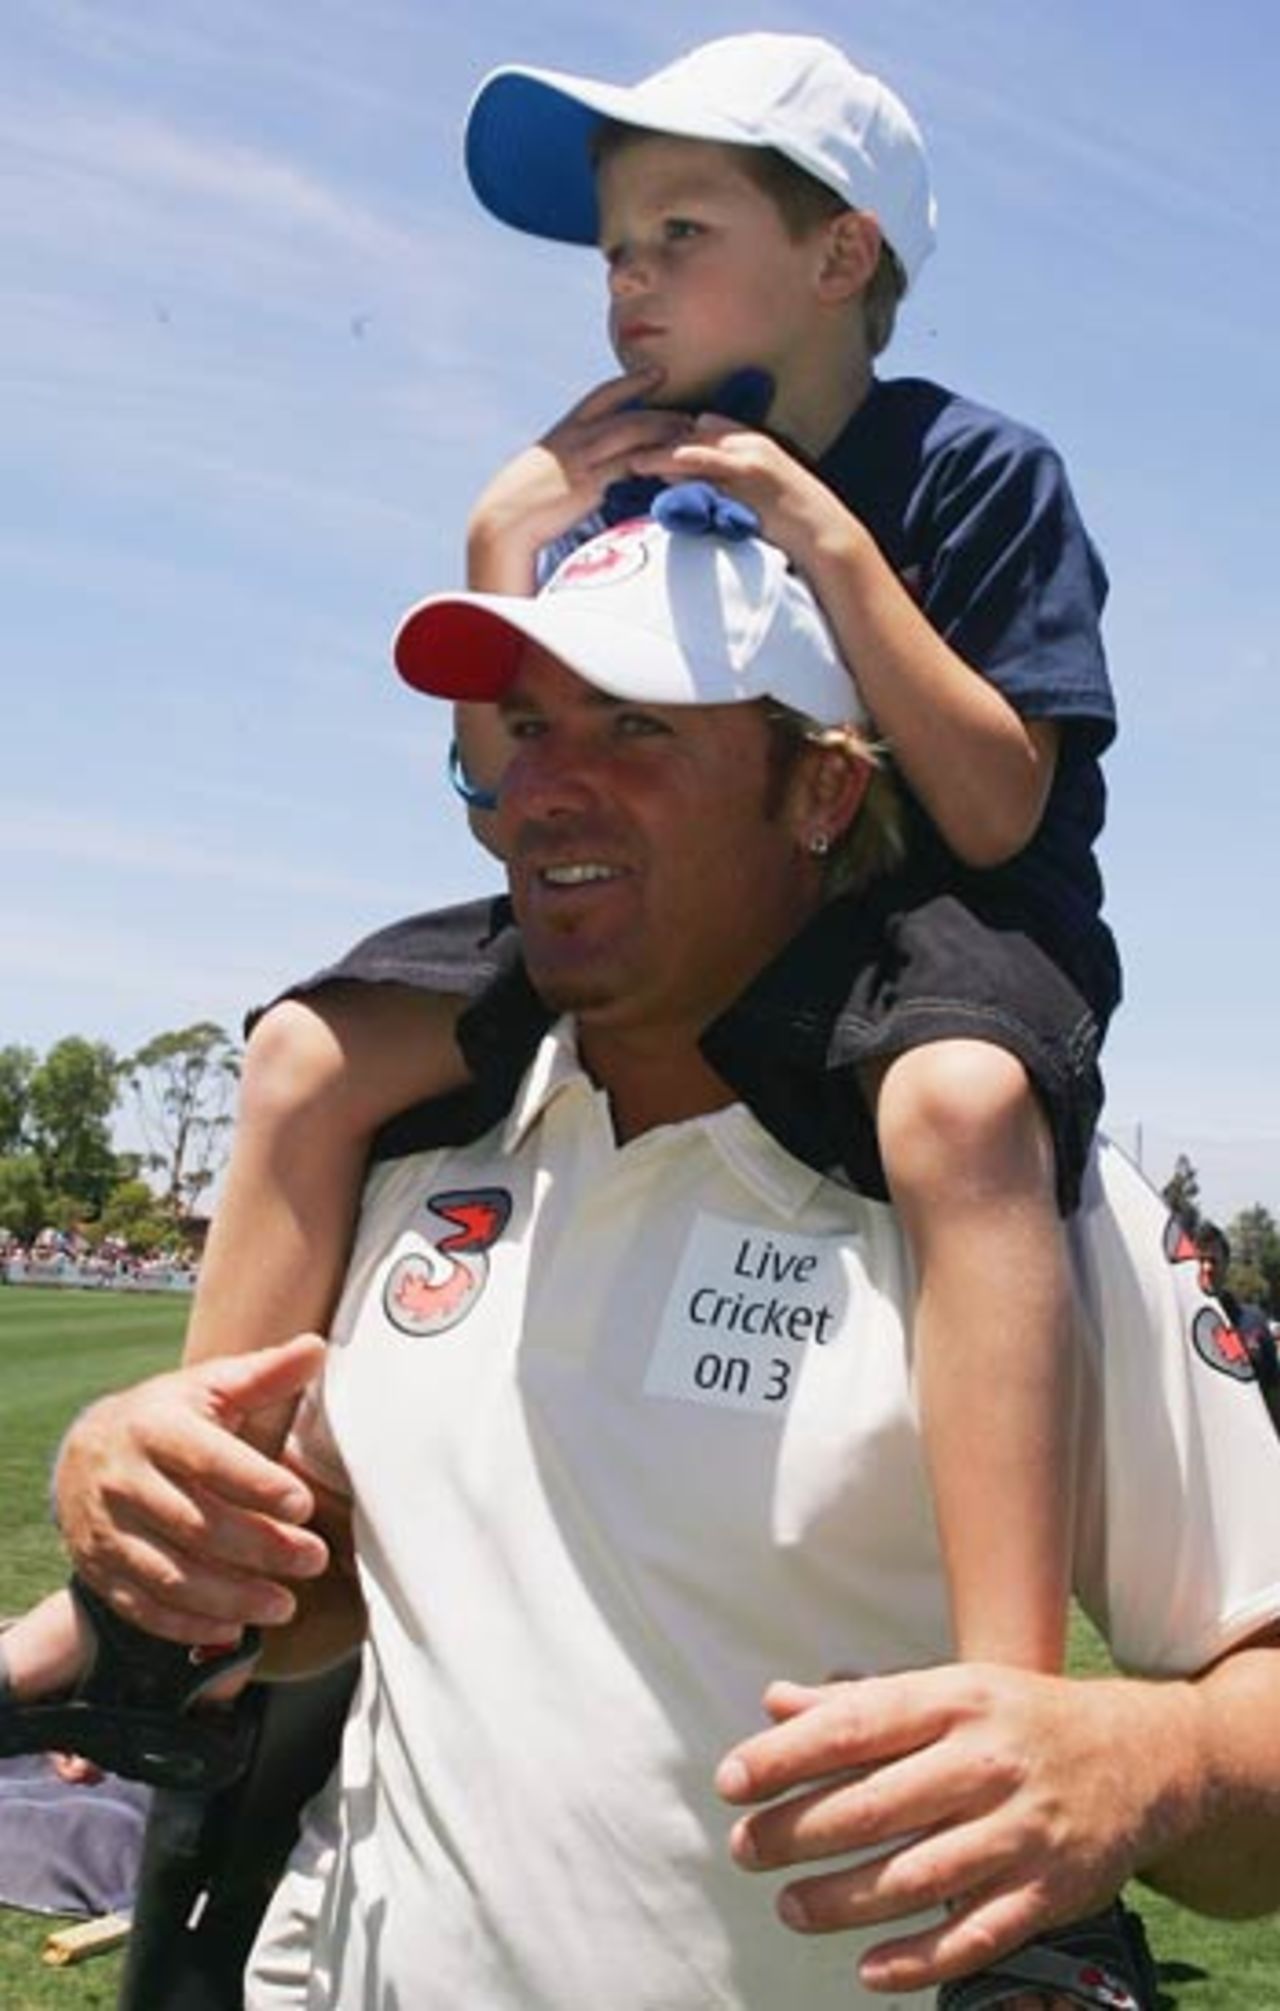 Shane Warne and his son during the six-a-side match between an Australia XI and the Essendon AFL Team, Windy Hill, Melbourne, December 22, 2005 